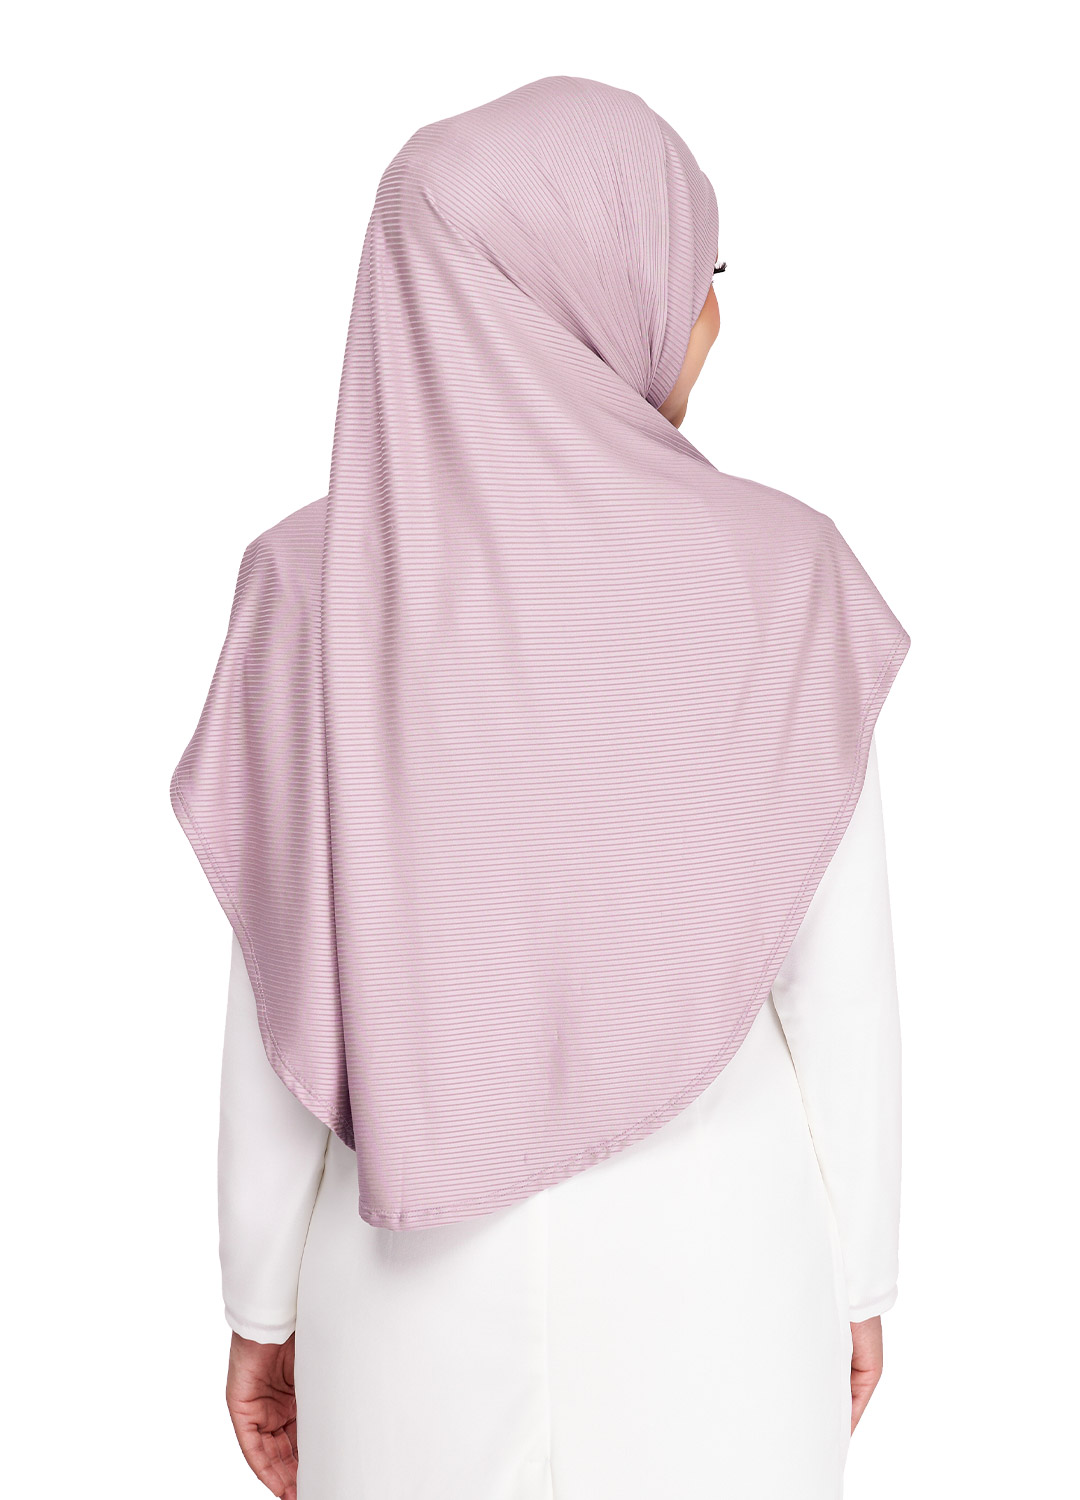 XTIVE SCARVES 03 PASTEL PINK